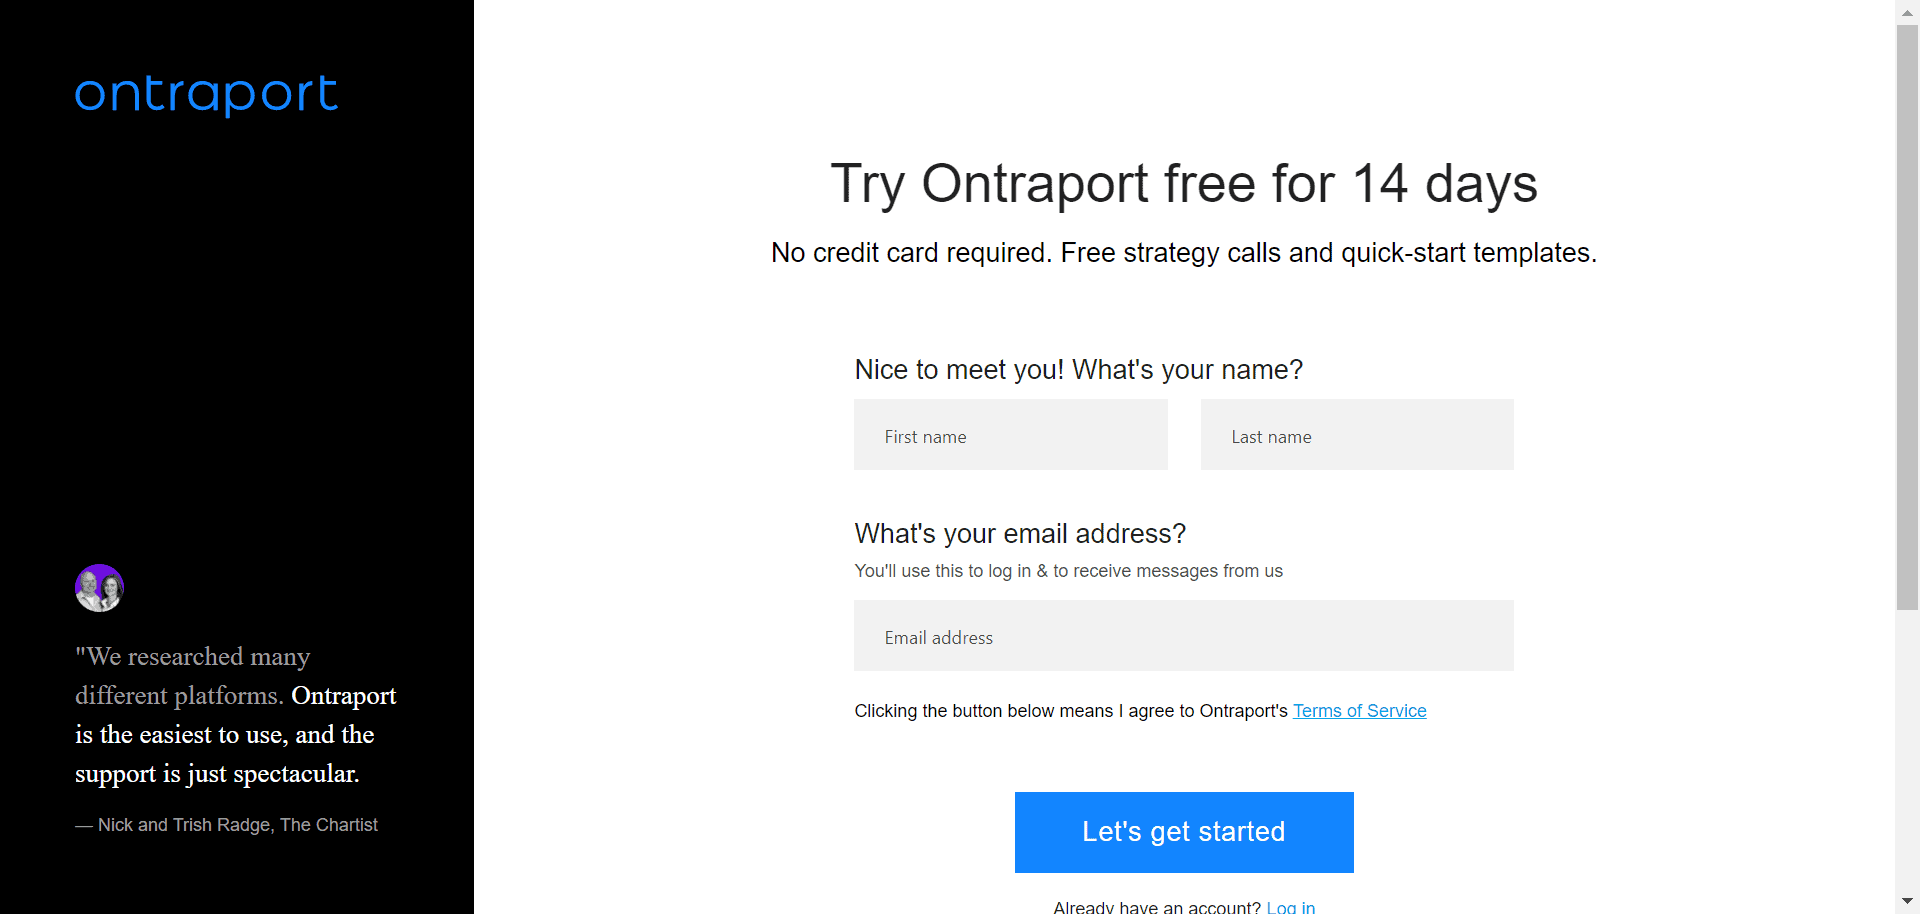 Ontraport-login and free trial